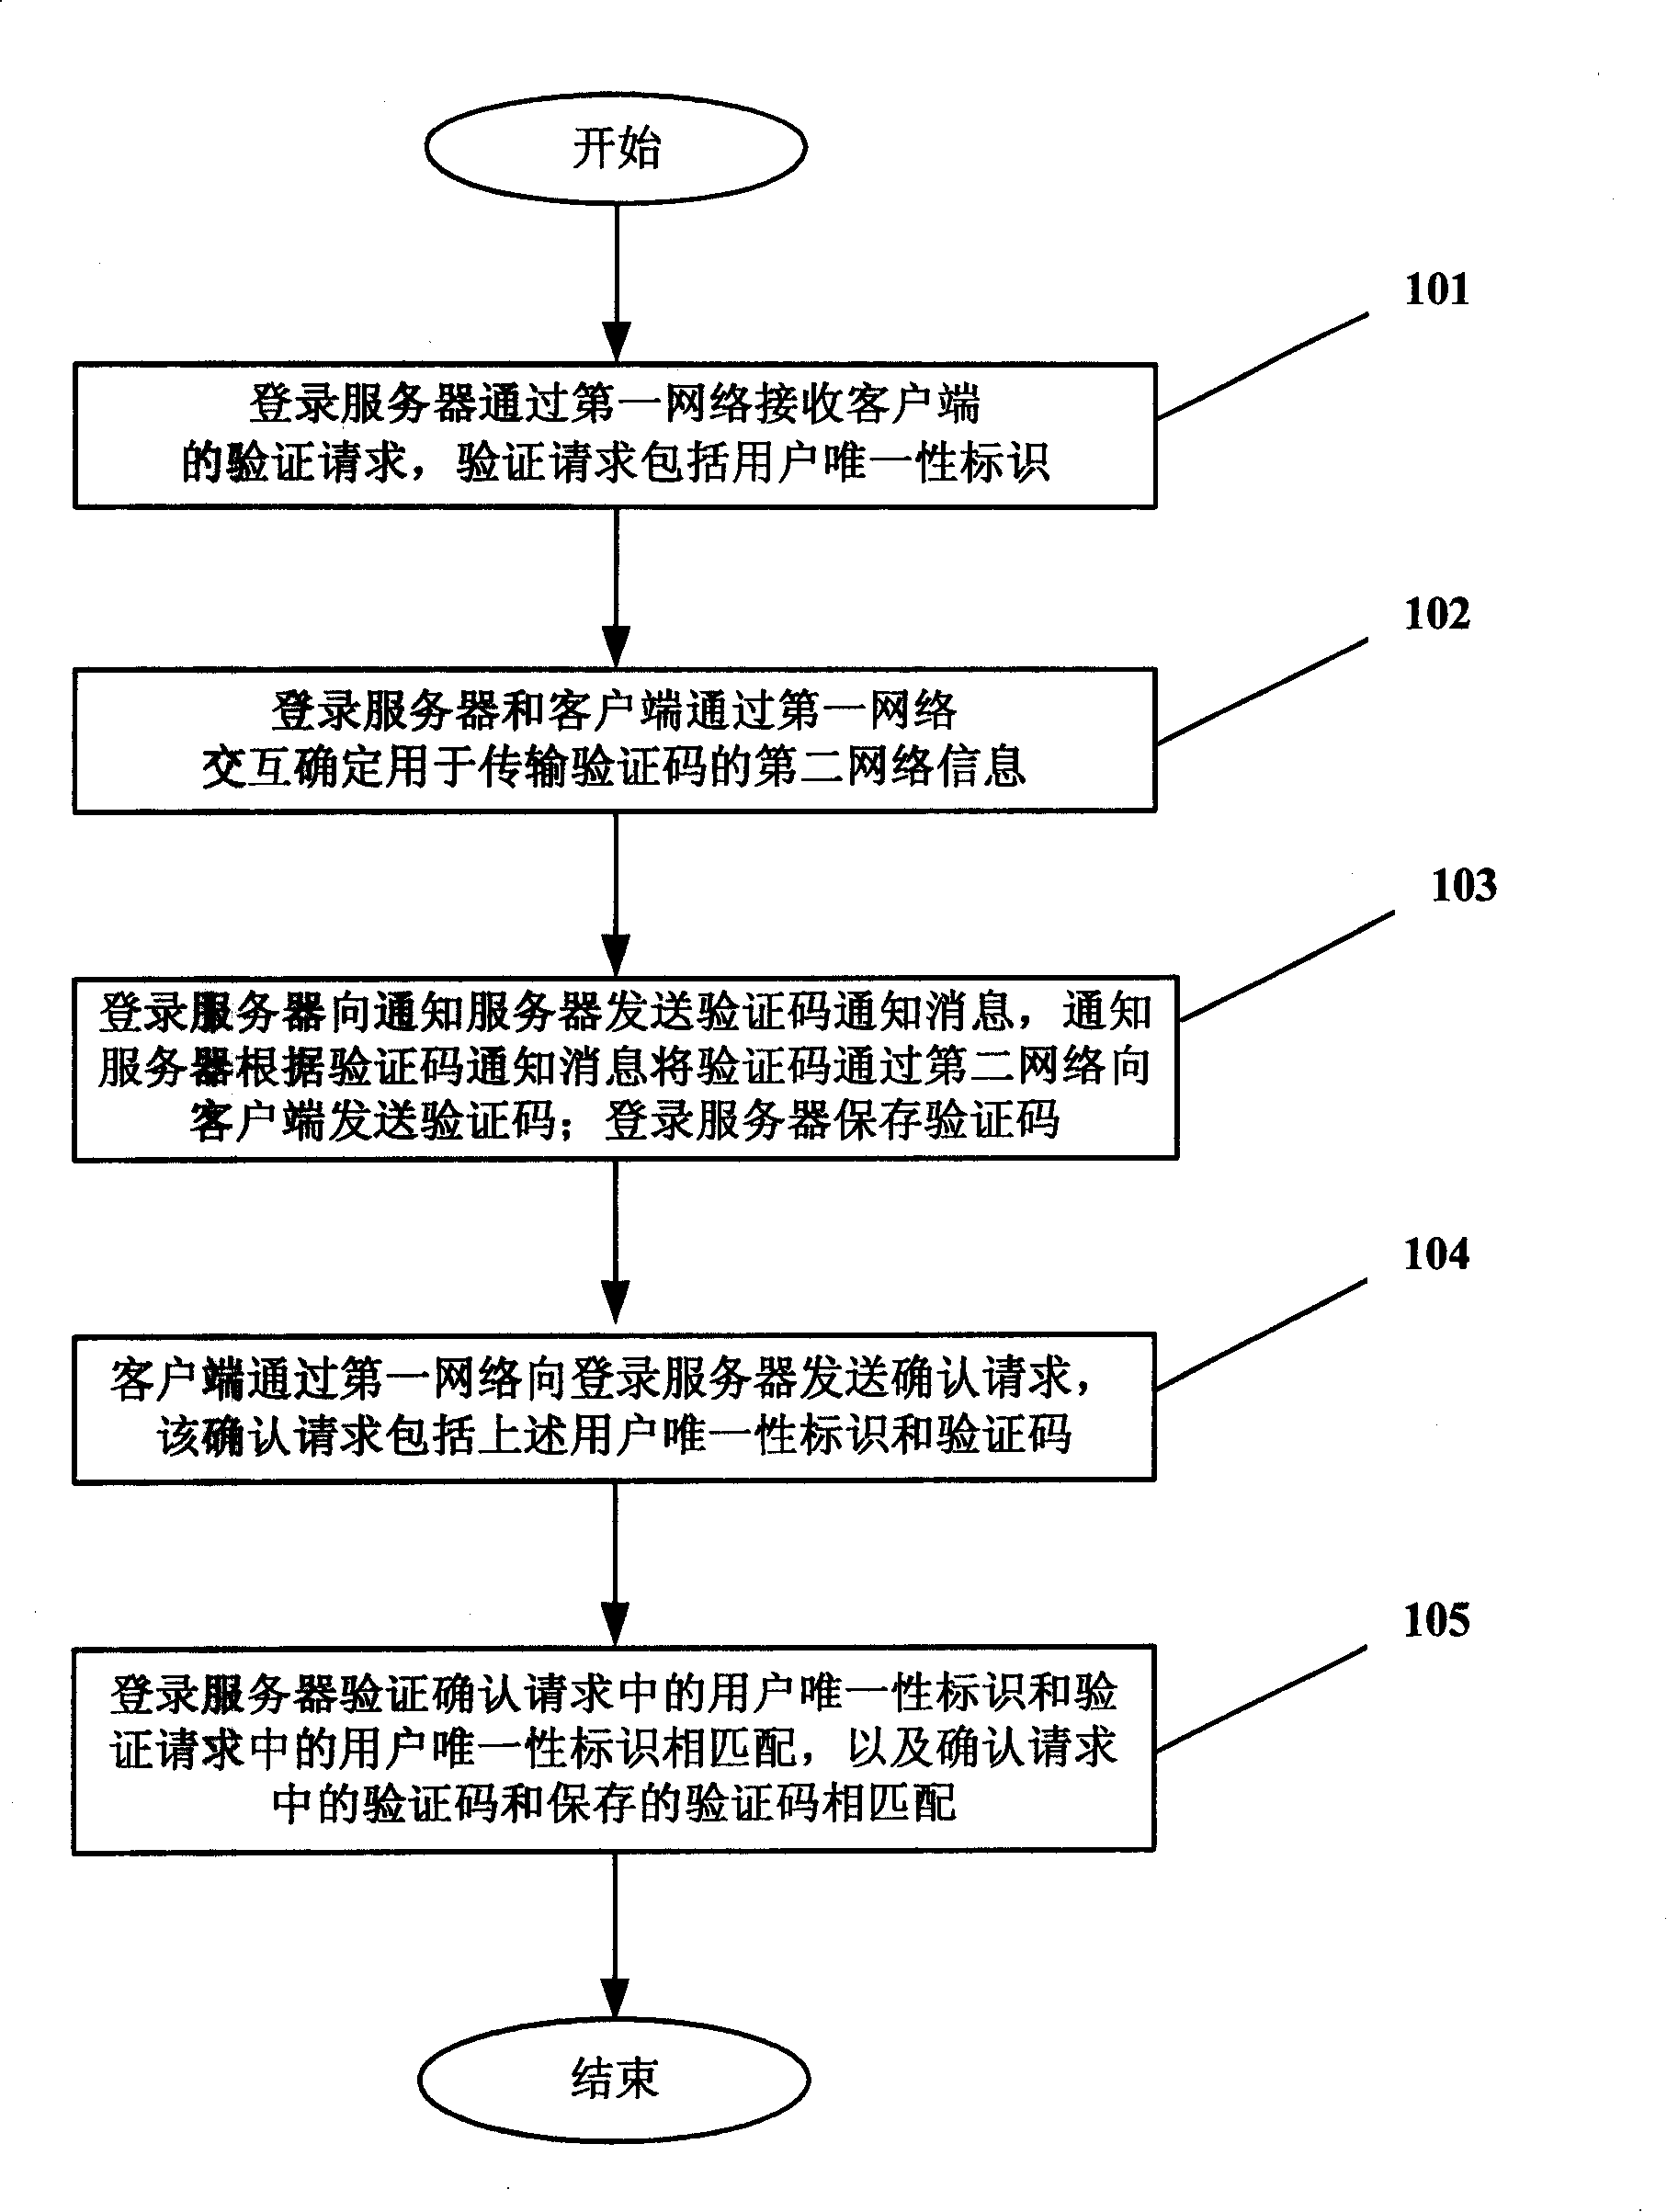 A validation method and system based on heterogeneous network